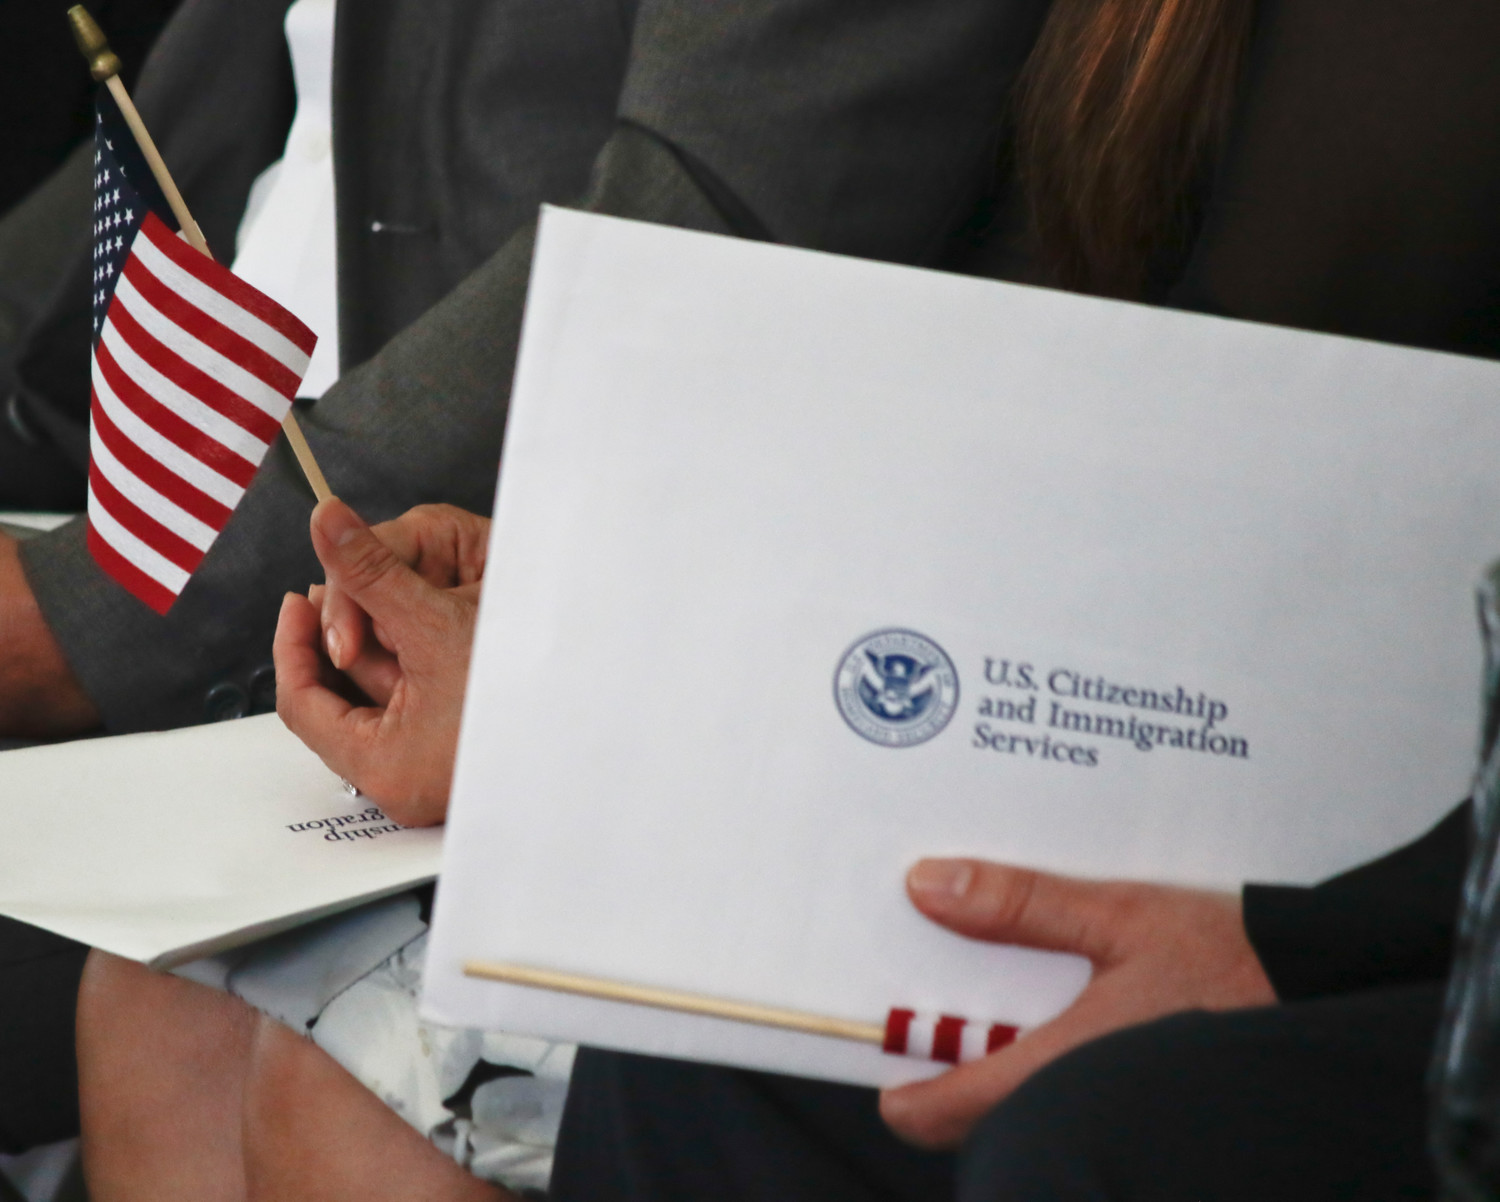 The Many immigrants whose Temporary Protected Status is set to expire soon are weighing their options, and hoping for a pathway to citizenship or permanent residency.